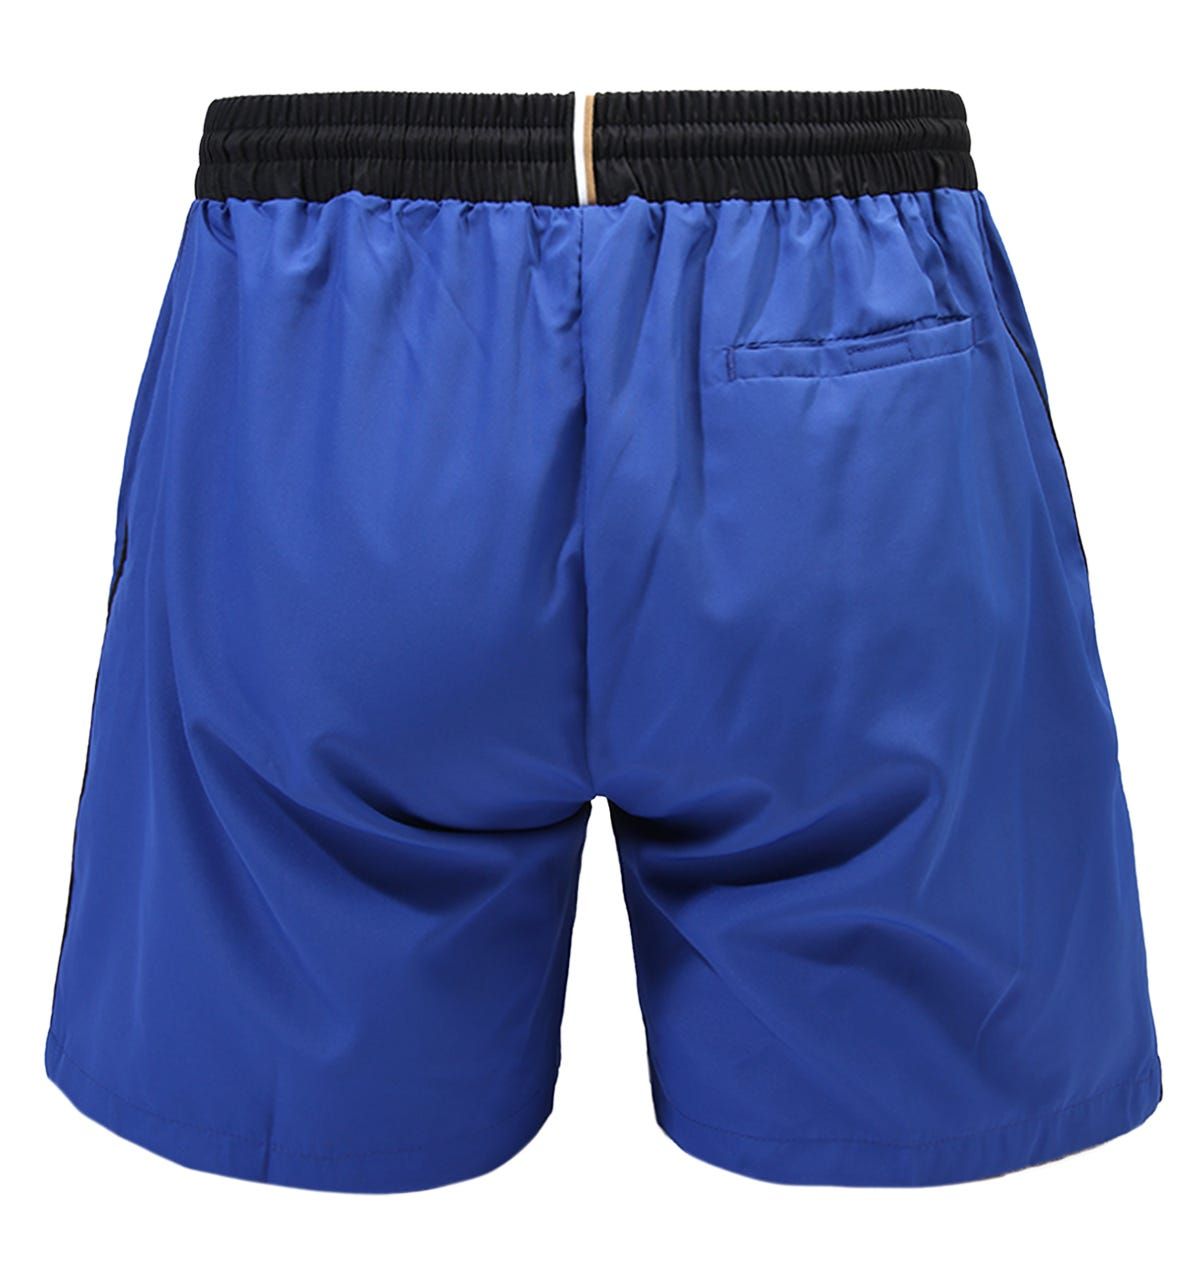 Swim in style this season with the Starfish Swim Shorts from BOSS Bodywear. These swim shorts are crafted from a quick-dry recycled synthetic fabric with a supportive mesh liner, offering optimum comfort throughout wear. Featuring a concealed drawstring waistband, front welt pockets and a single rear welt pocket. Finished with a contrast BOSS logo, on the left thigh.Regular Fit, Quick Dry Recycled Polyester , Inner Mesh Lining, Concealed Drawstring Waistband, Twin Front Welt Pockets, Rear Welt Pocket , BOSS Branding. Style & Fit:Regular Fit, Fits True to Size. Composition & Care:100% Recycled Polyester, Machine Wash.